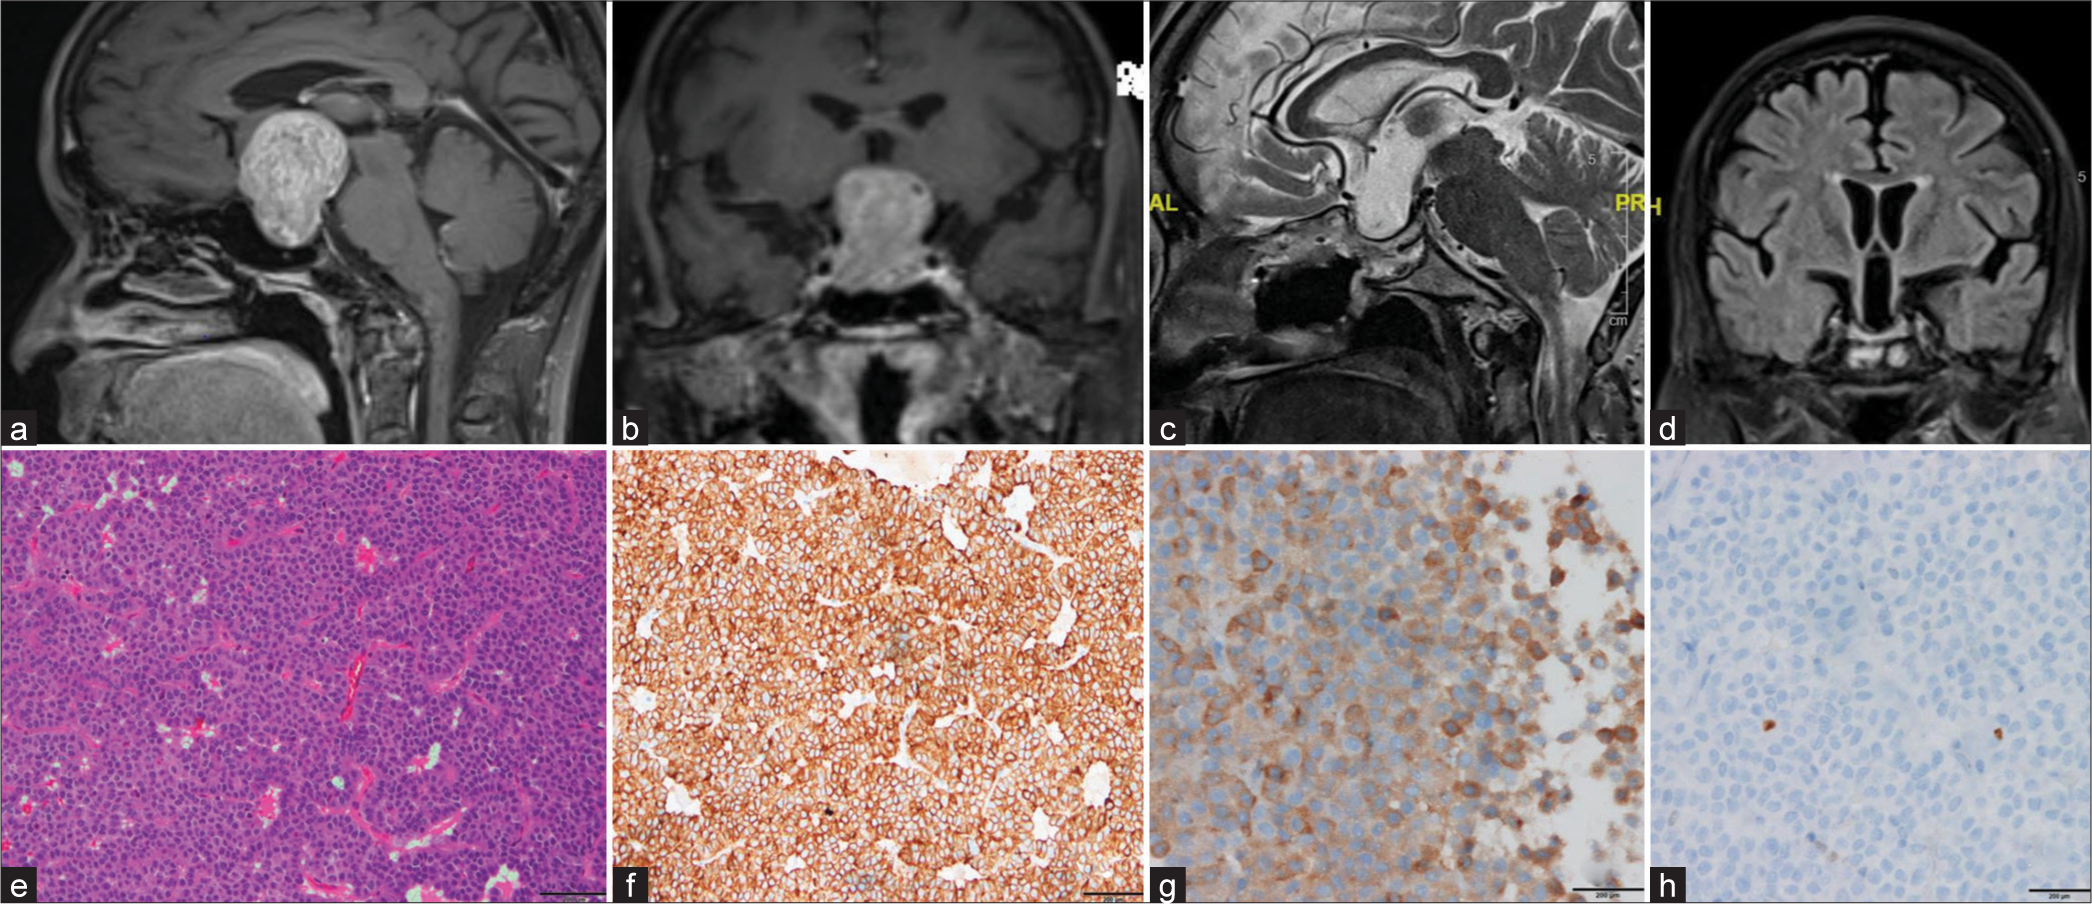 Reversible dementia in a case of functional gonadotropin-secreting pituitary adenoma: Different shades of gray